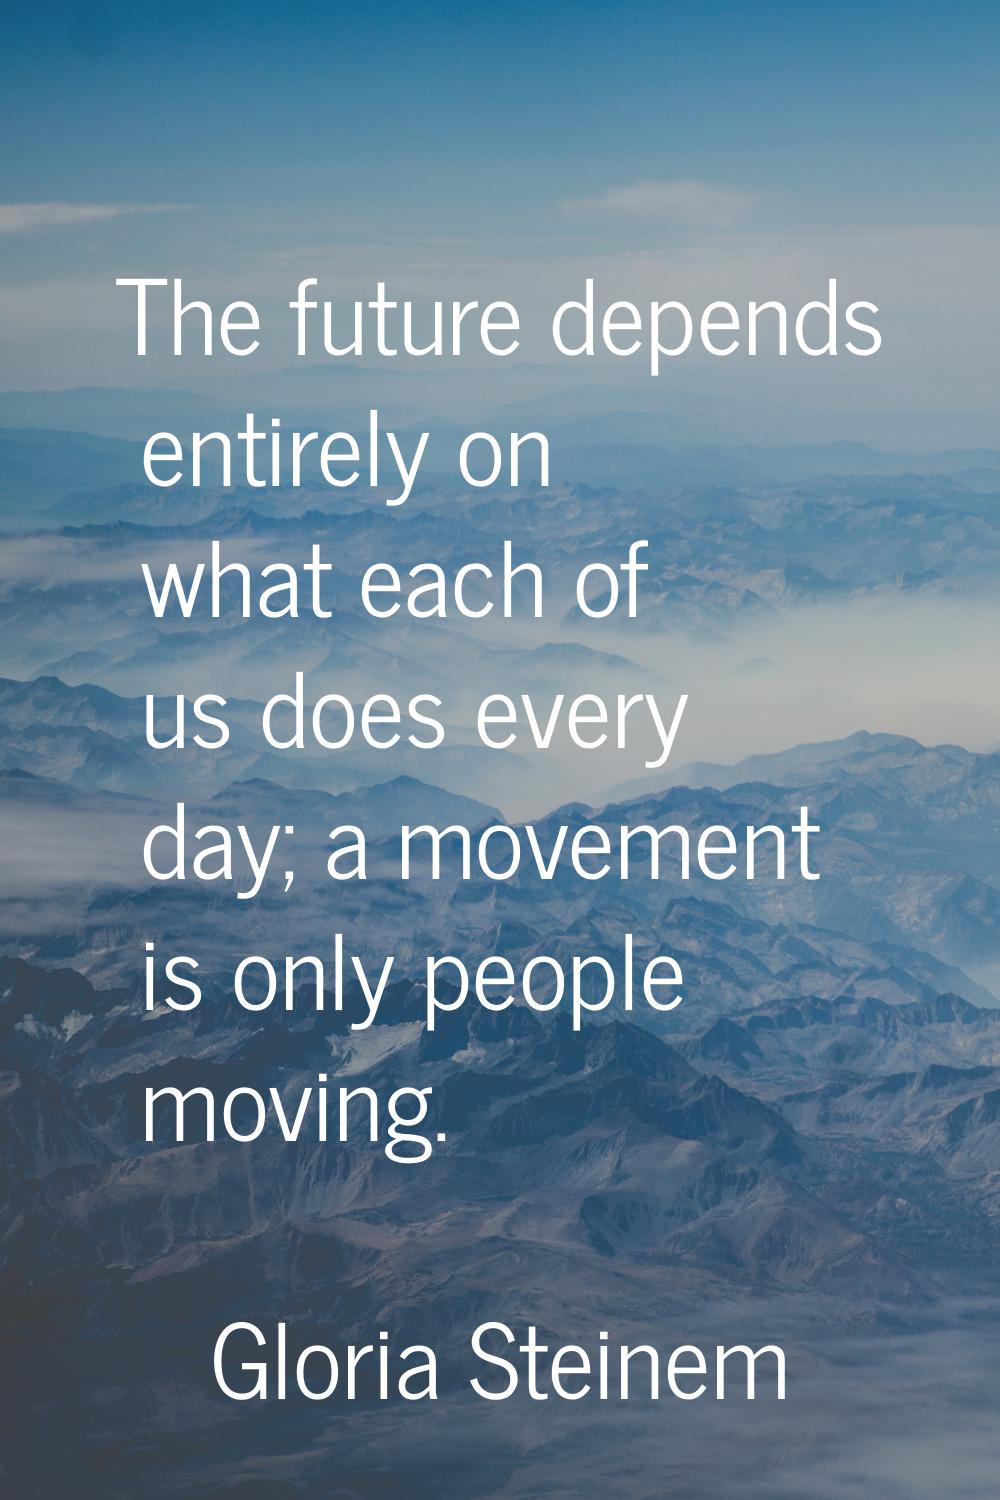 The future depends entirely on what each of us does every day; a movement is only people moving.